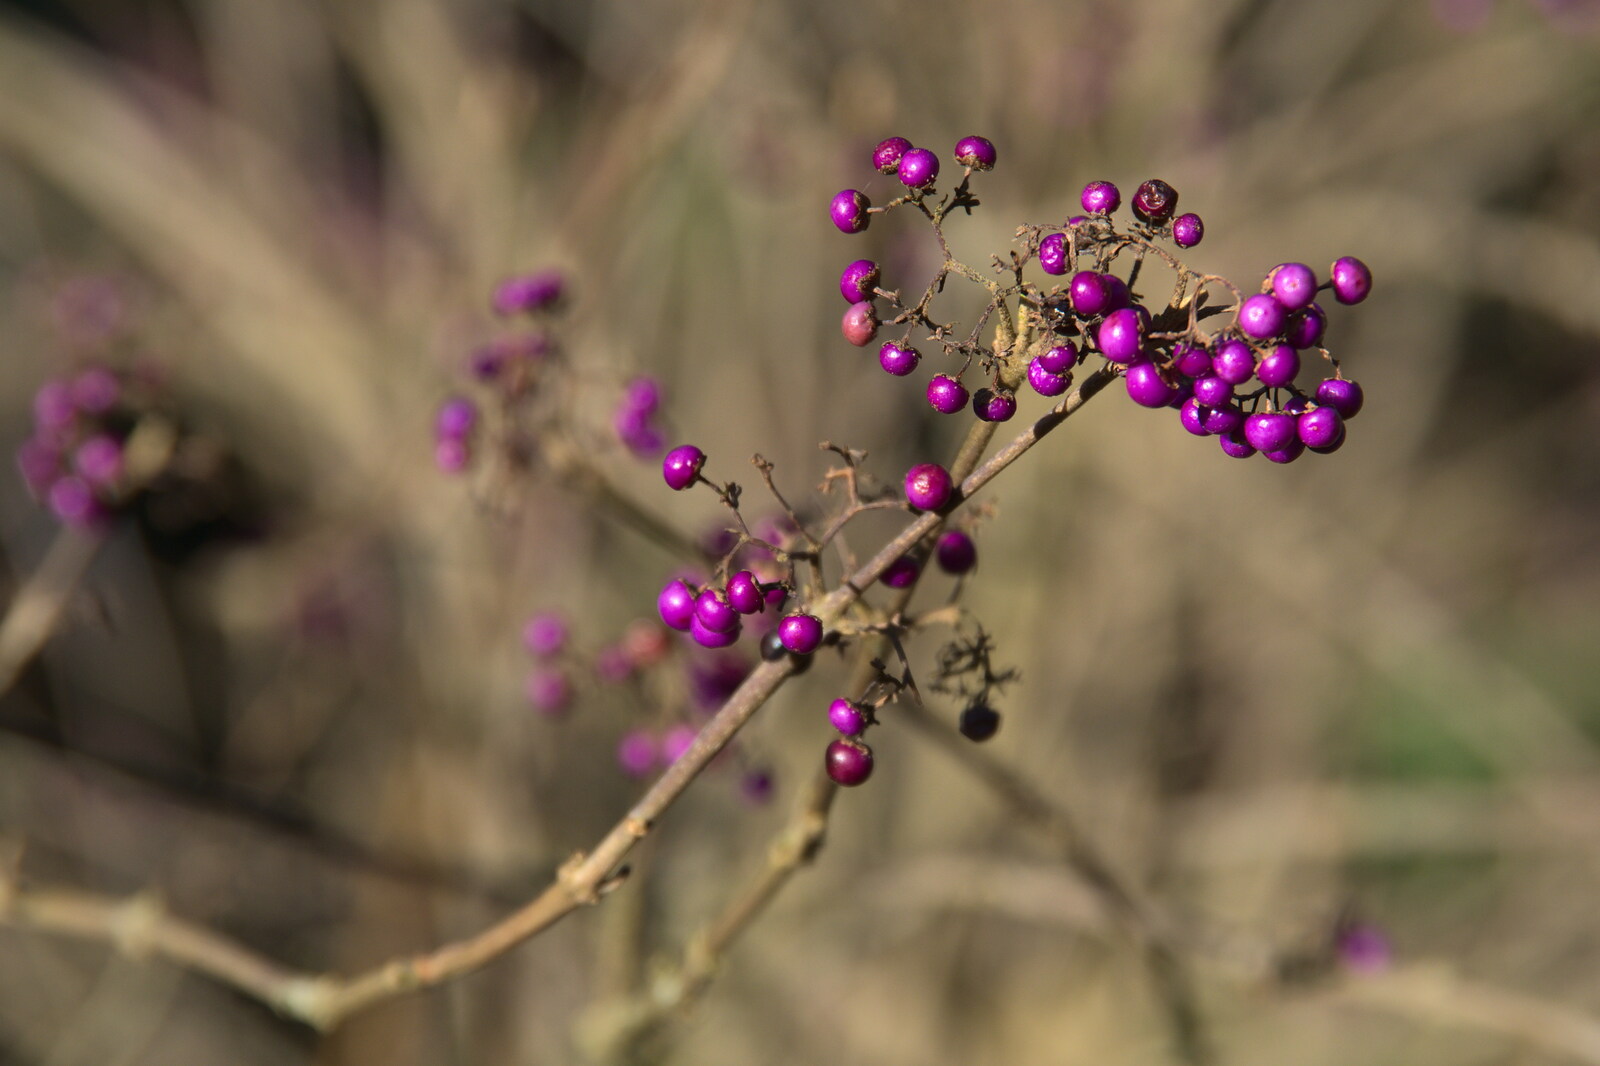 Bright purple berries from A Visit to Blickling Hall, Aylsham, Norfolk - 9th January 2022